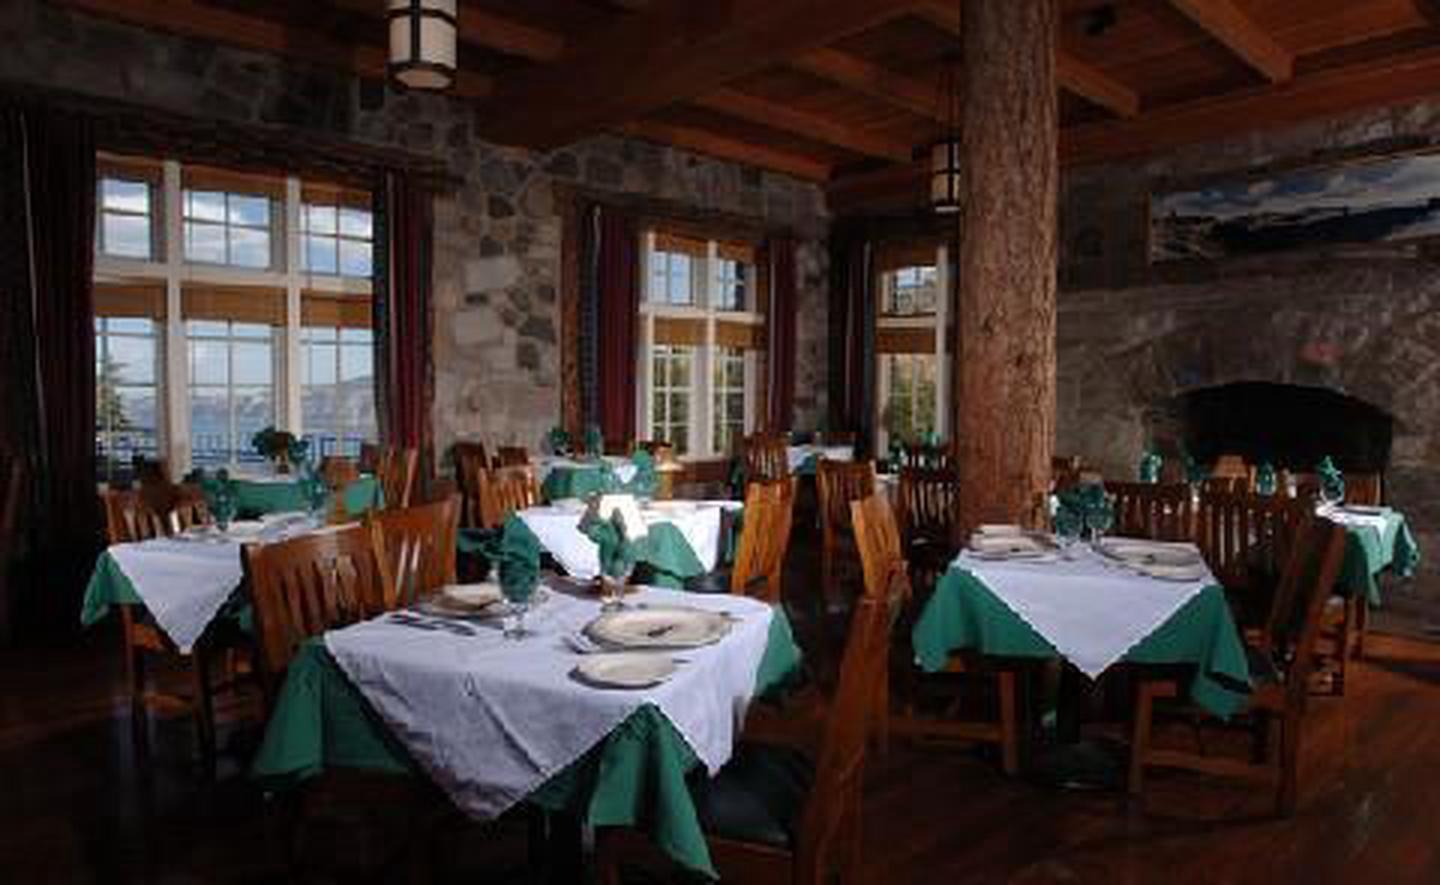 Local Cuisine in a Northwest SettingThe Crater Lake Lodge Dining Room features Northwest cuisine made with choice Oregon-grown ingredients. Sample the best of what Oregon has to offer, from the freshest, locally grown mushrooms and berries to Rogue Valley cheeses and wines.